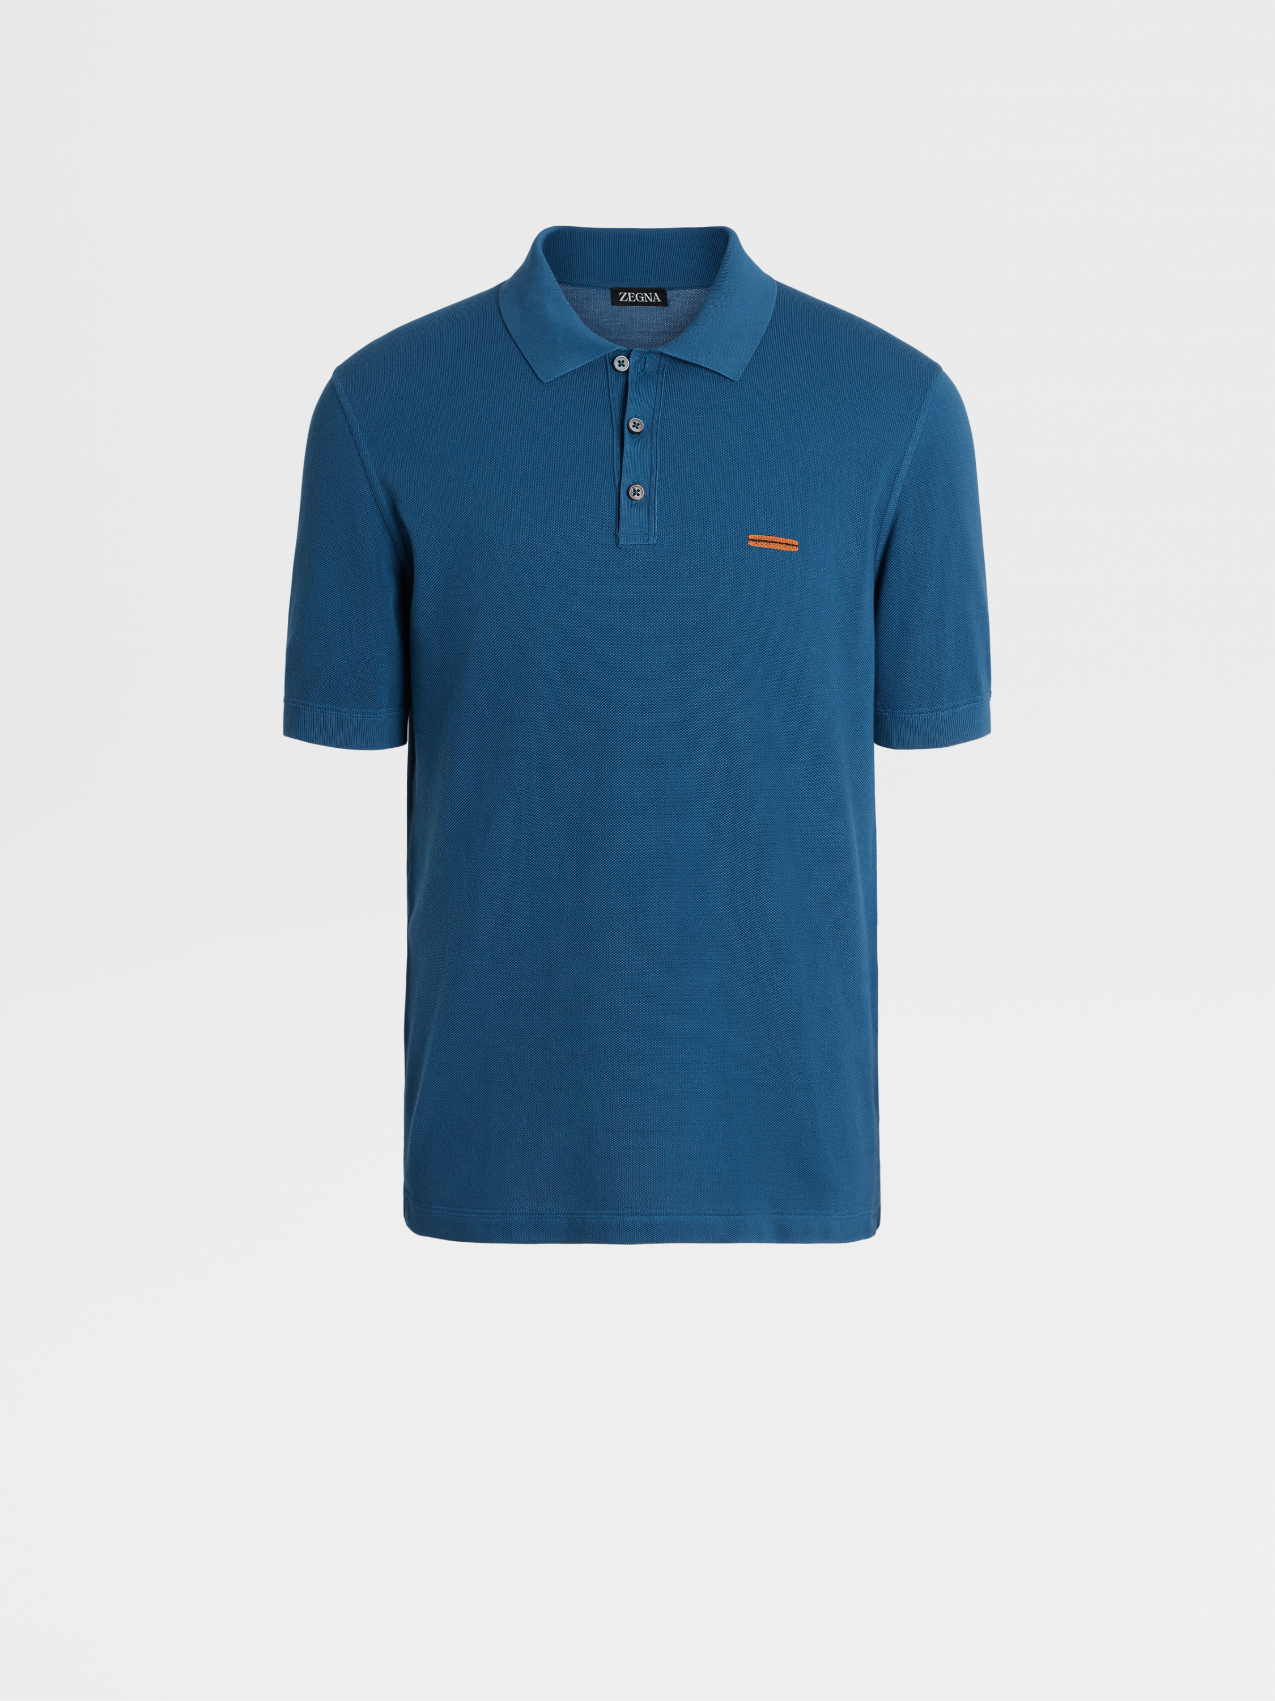 Light Teal Blue Pure Cotton Short-sleeve Knit Polo